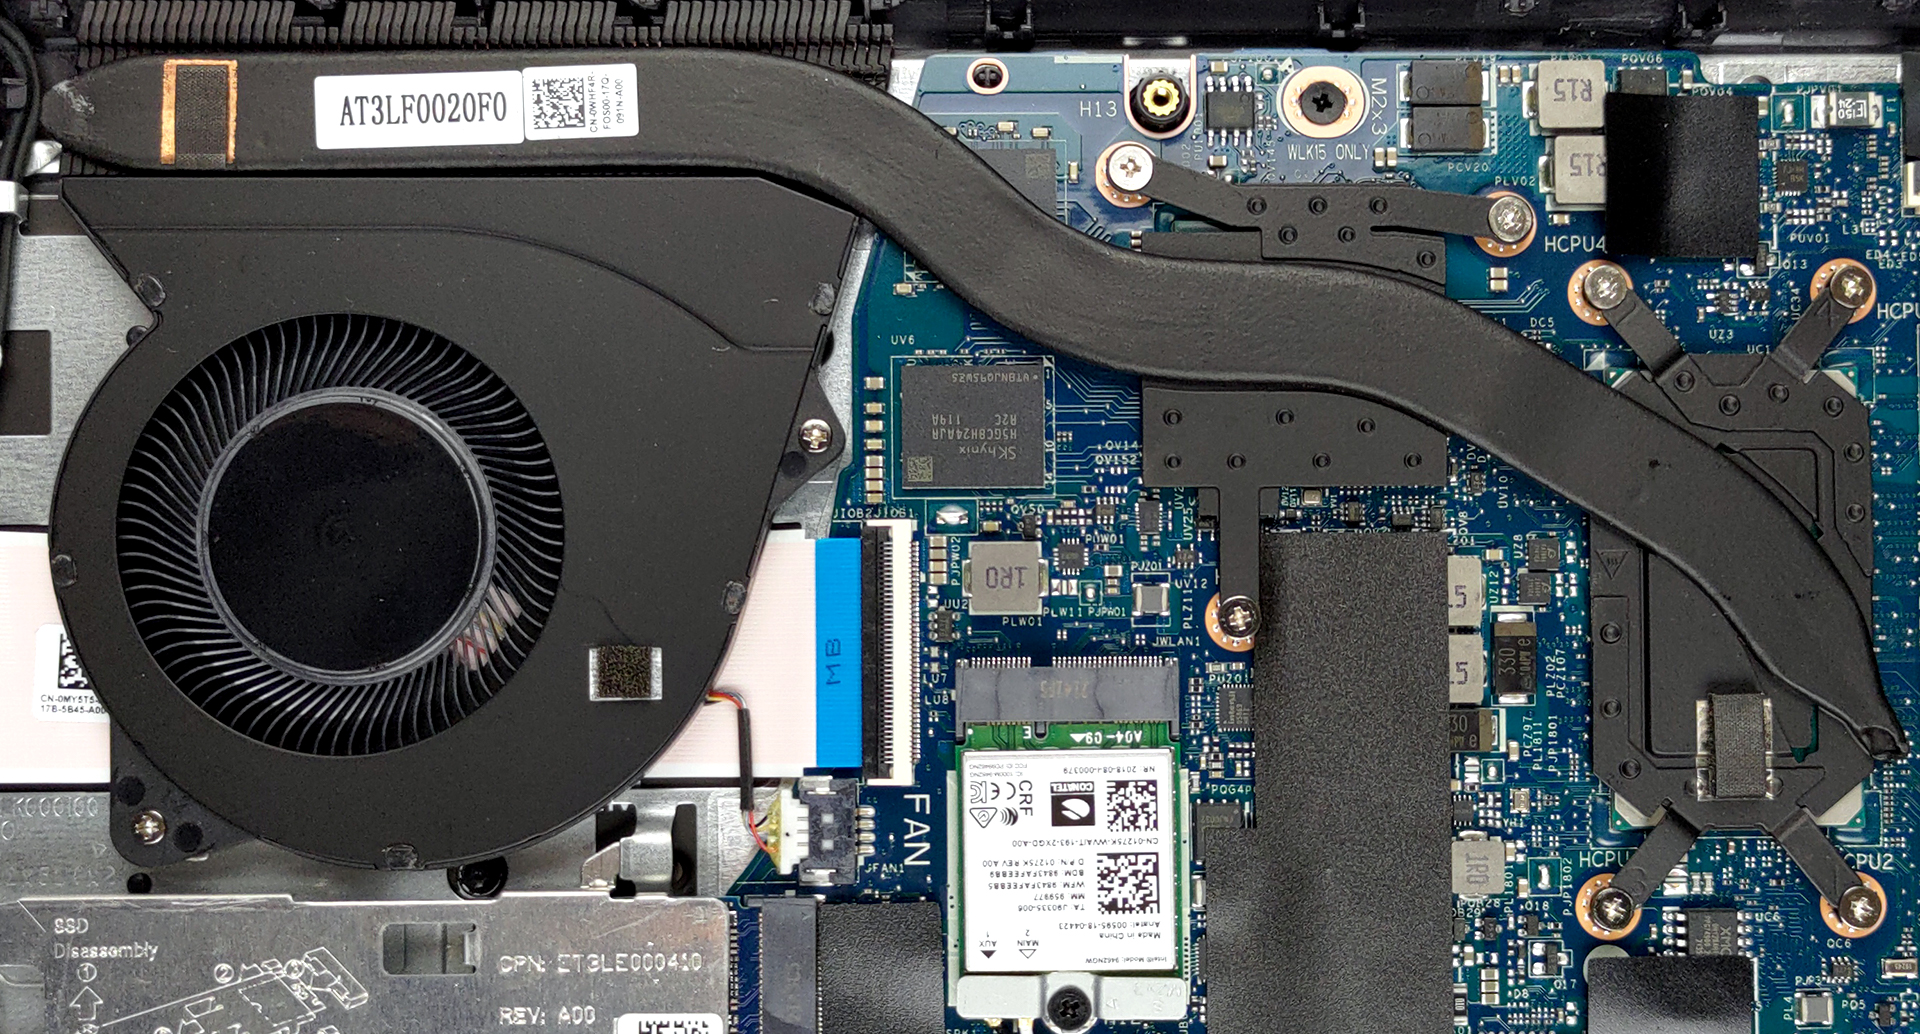 Inside Dell Vostro 15 3510 - disassembly and upgrade options ...